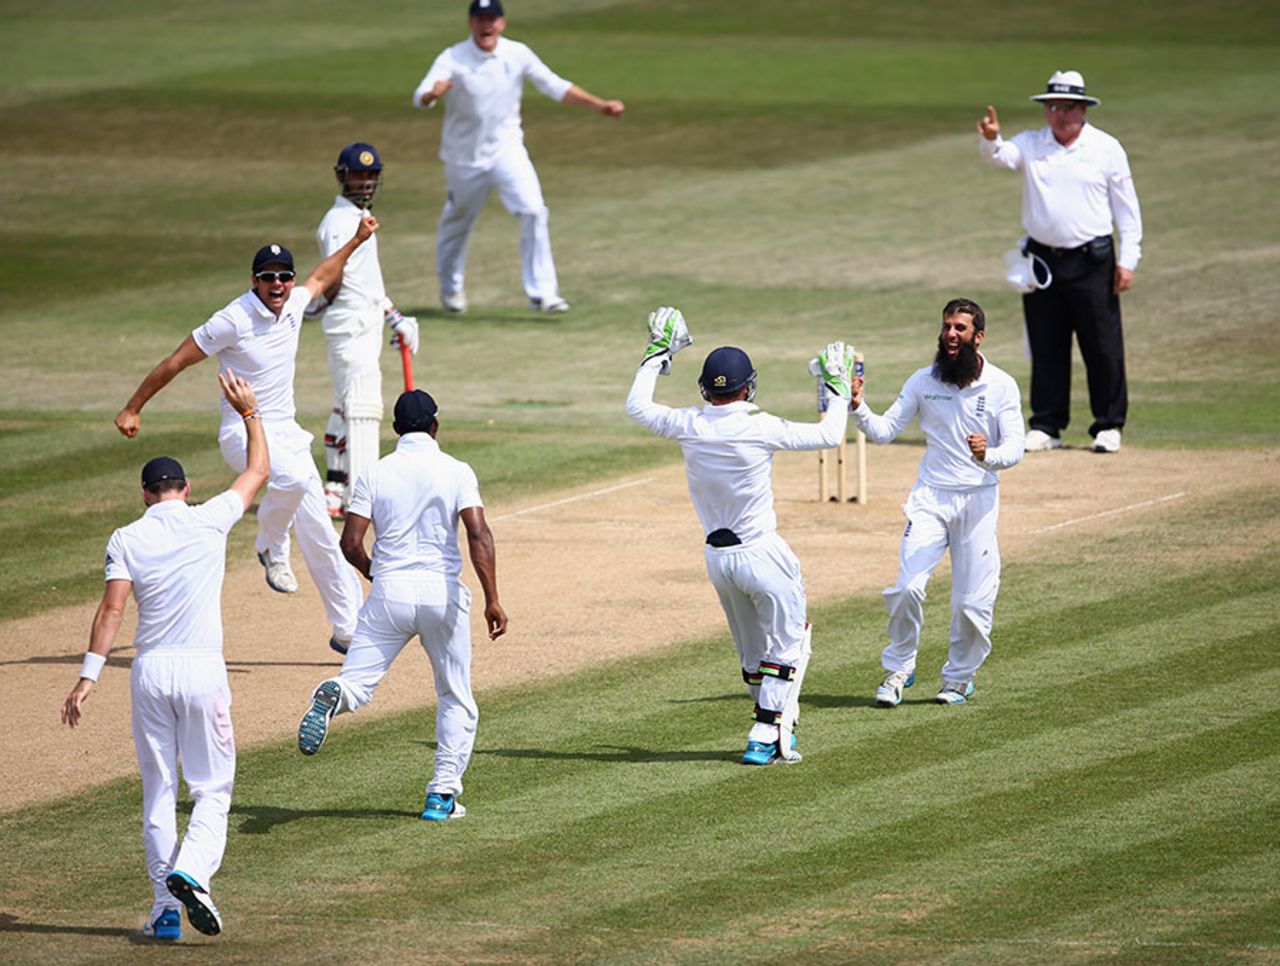 England celebrate as Bhuvneshwar Kumar is given out, England v India, 3rd Investec Test, Ageas Bowl, 5th day, July 31, 2014